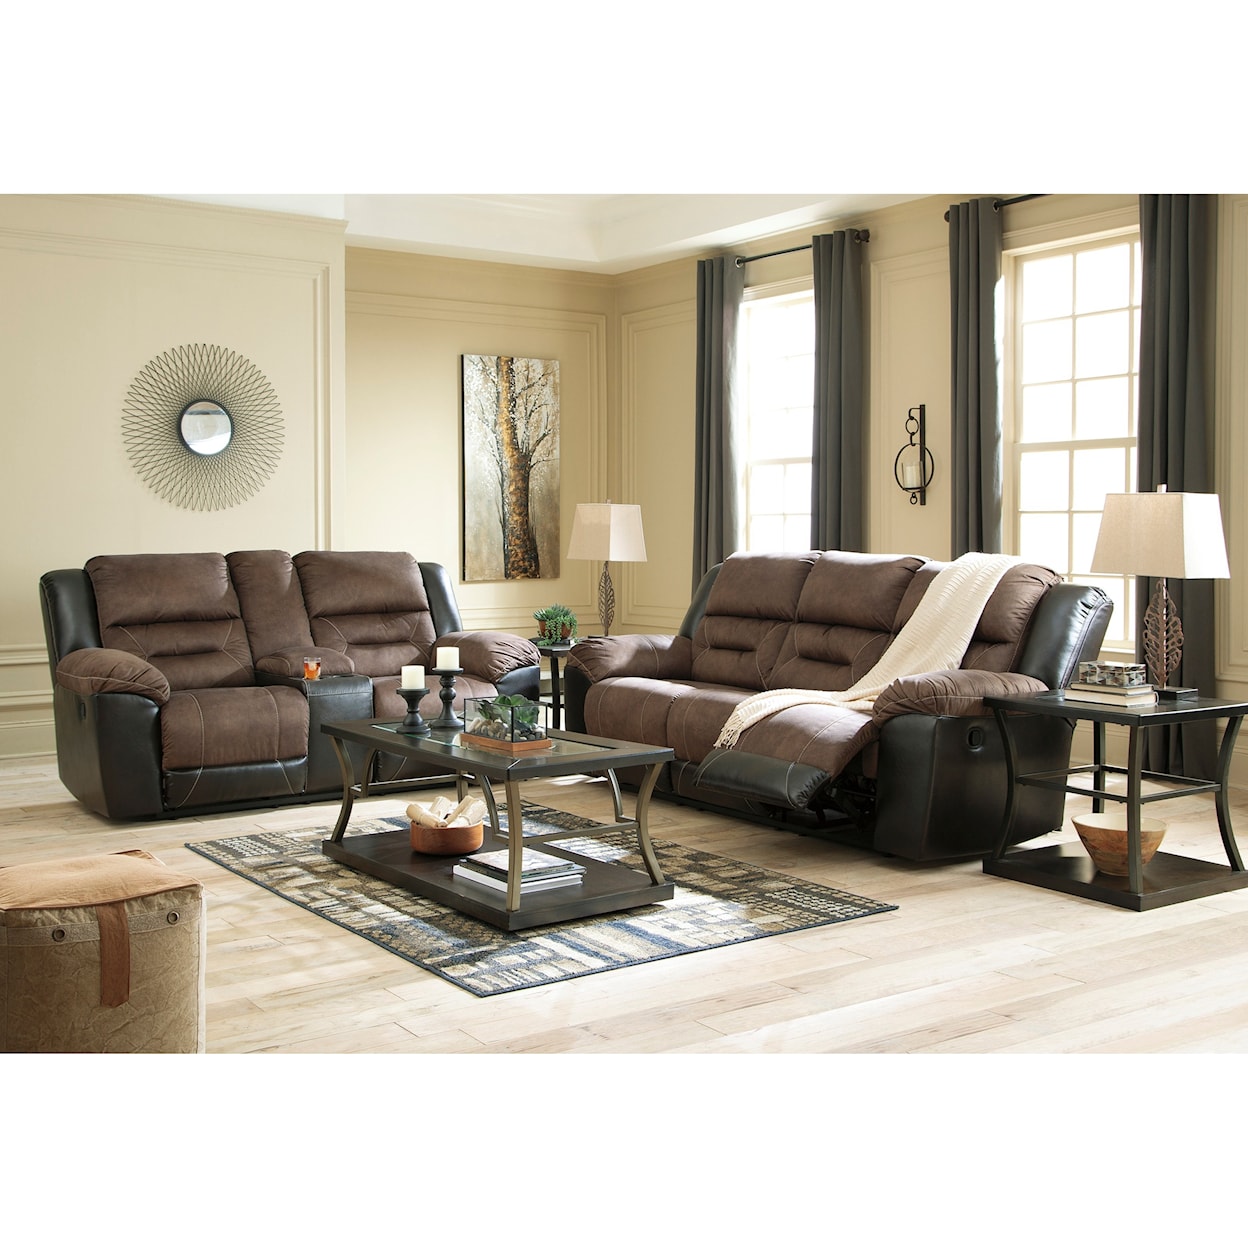 Signature Design Earhart Reclining Living Room Group